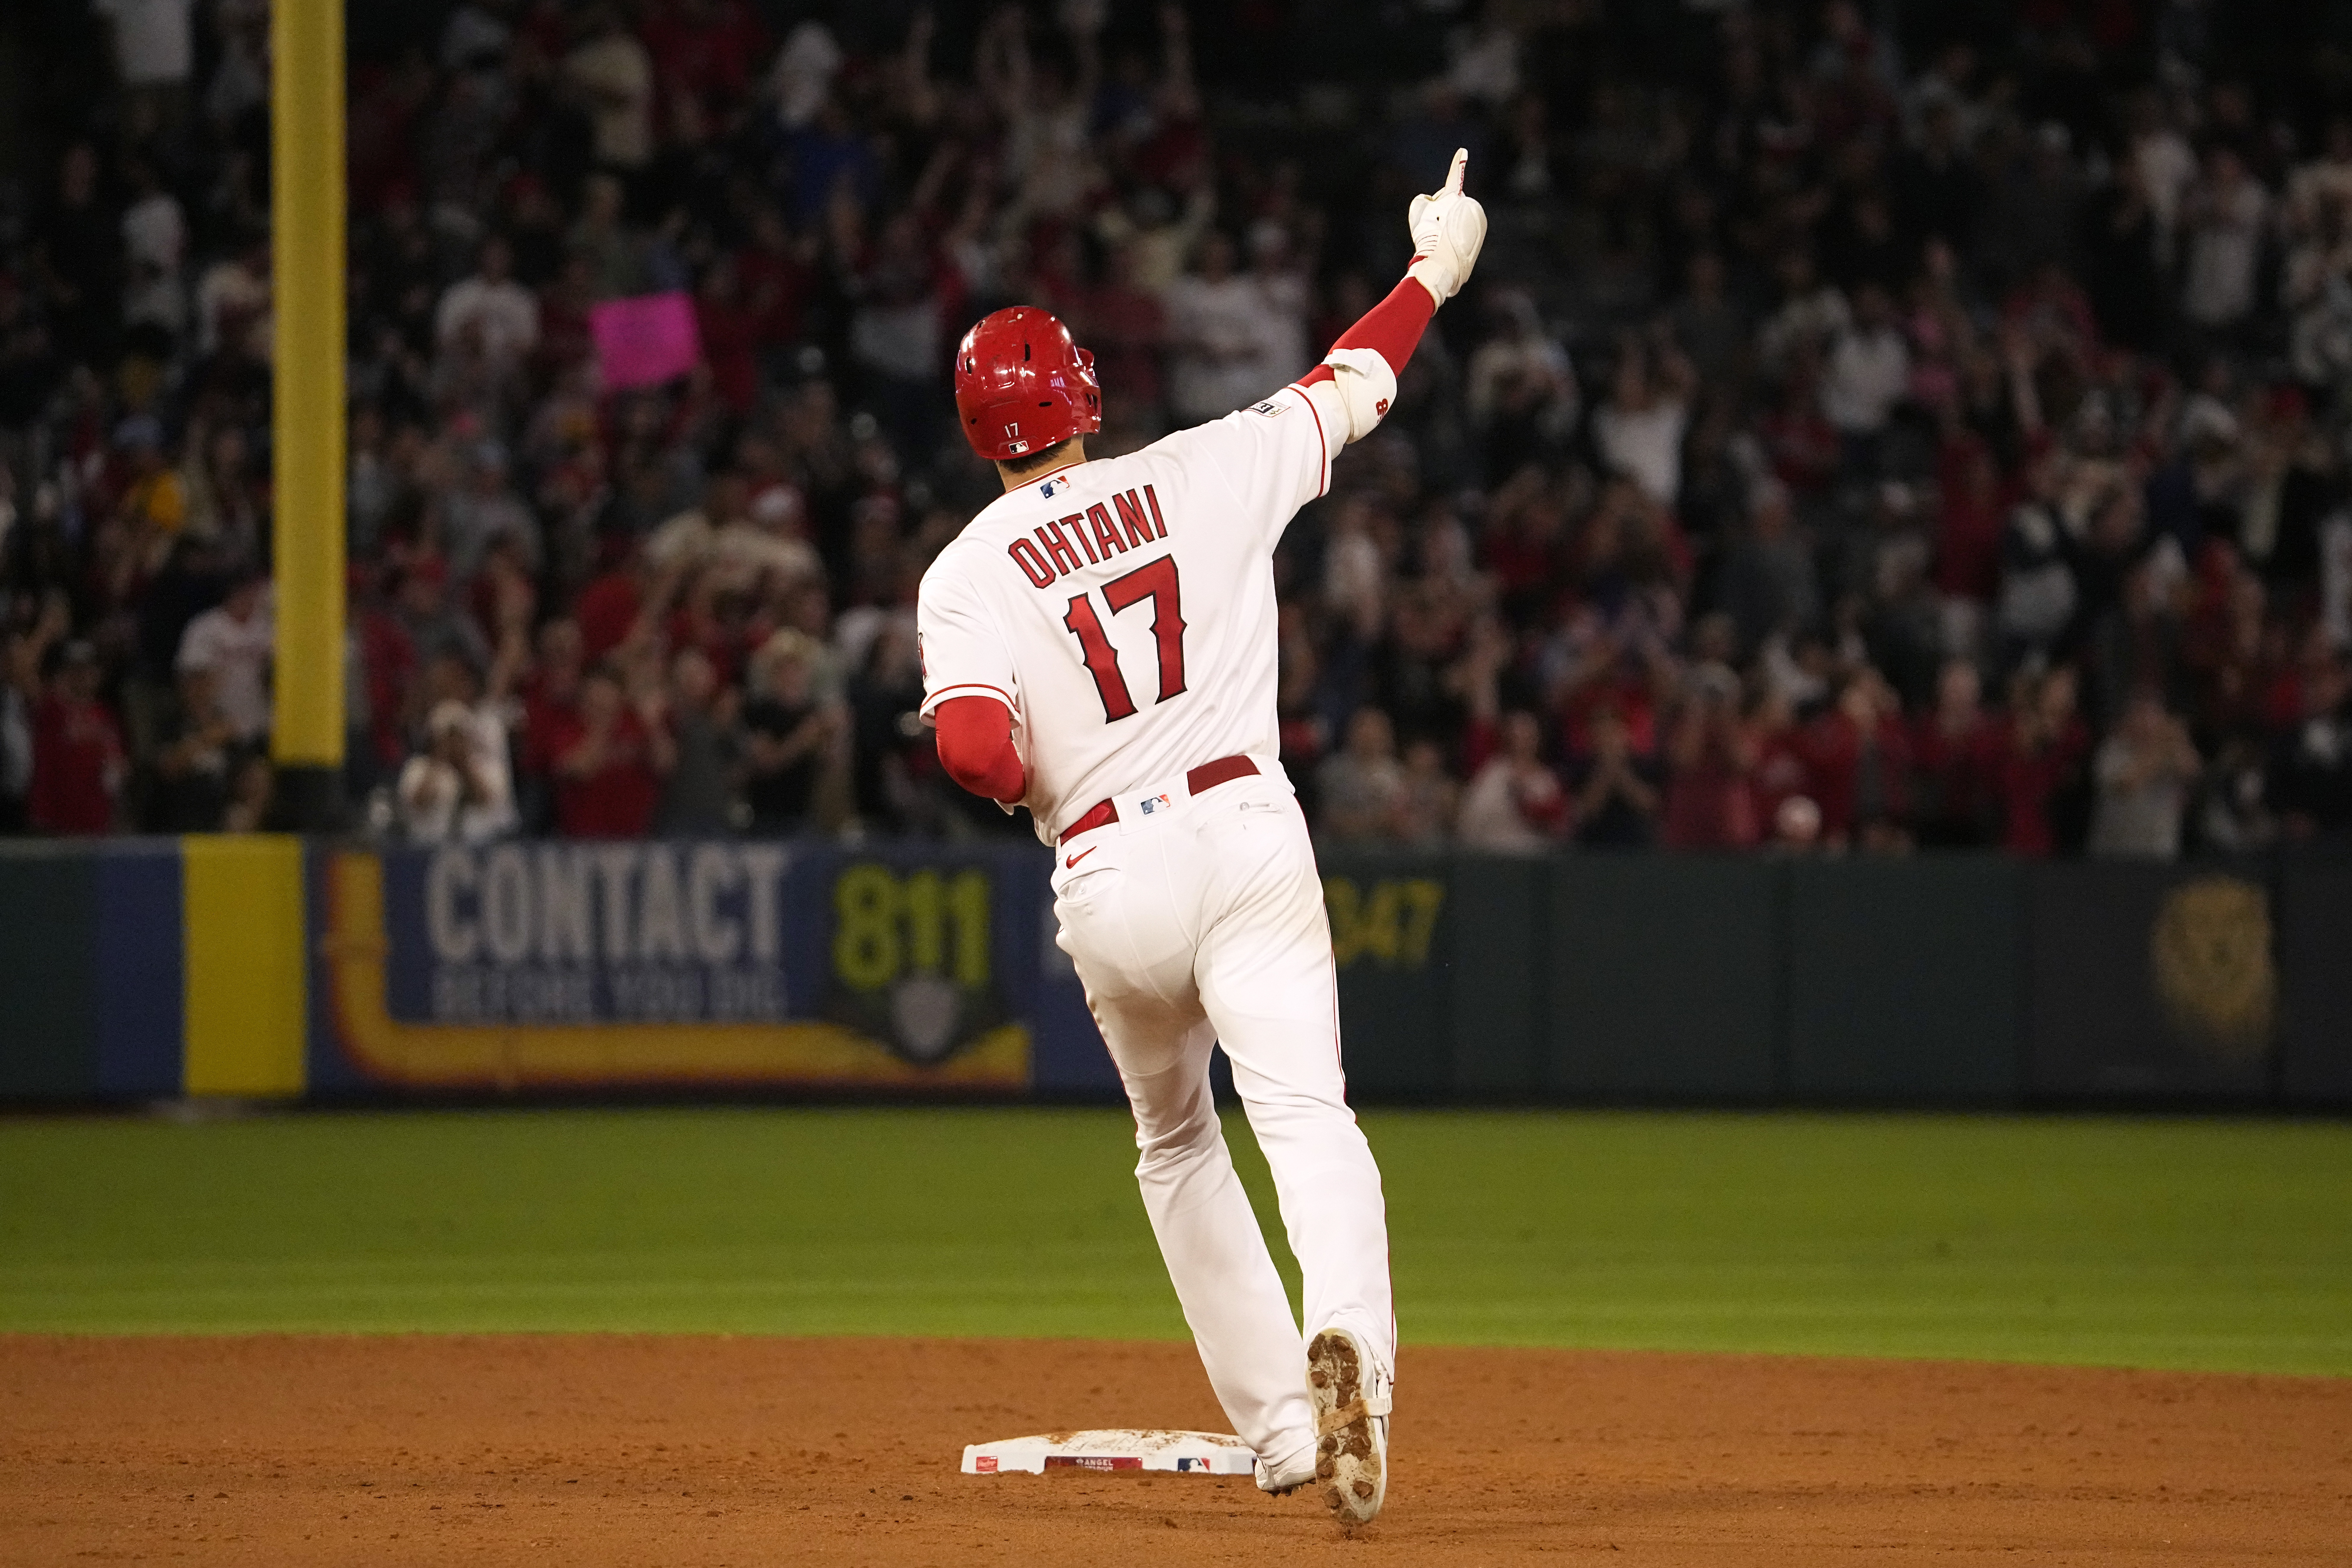 Baseball: Shohei Ohtani leads AL votes for 1st time to land All-Star spot